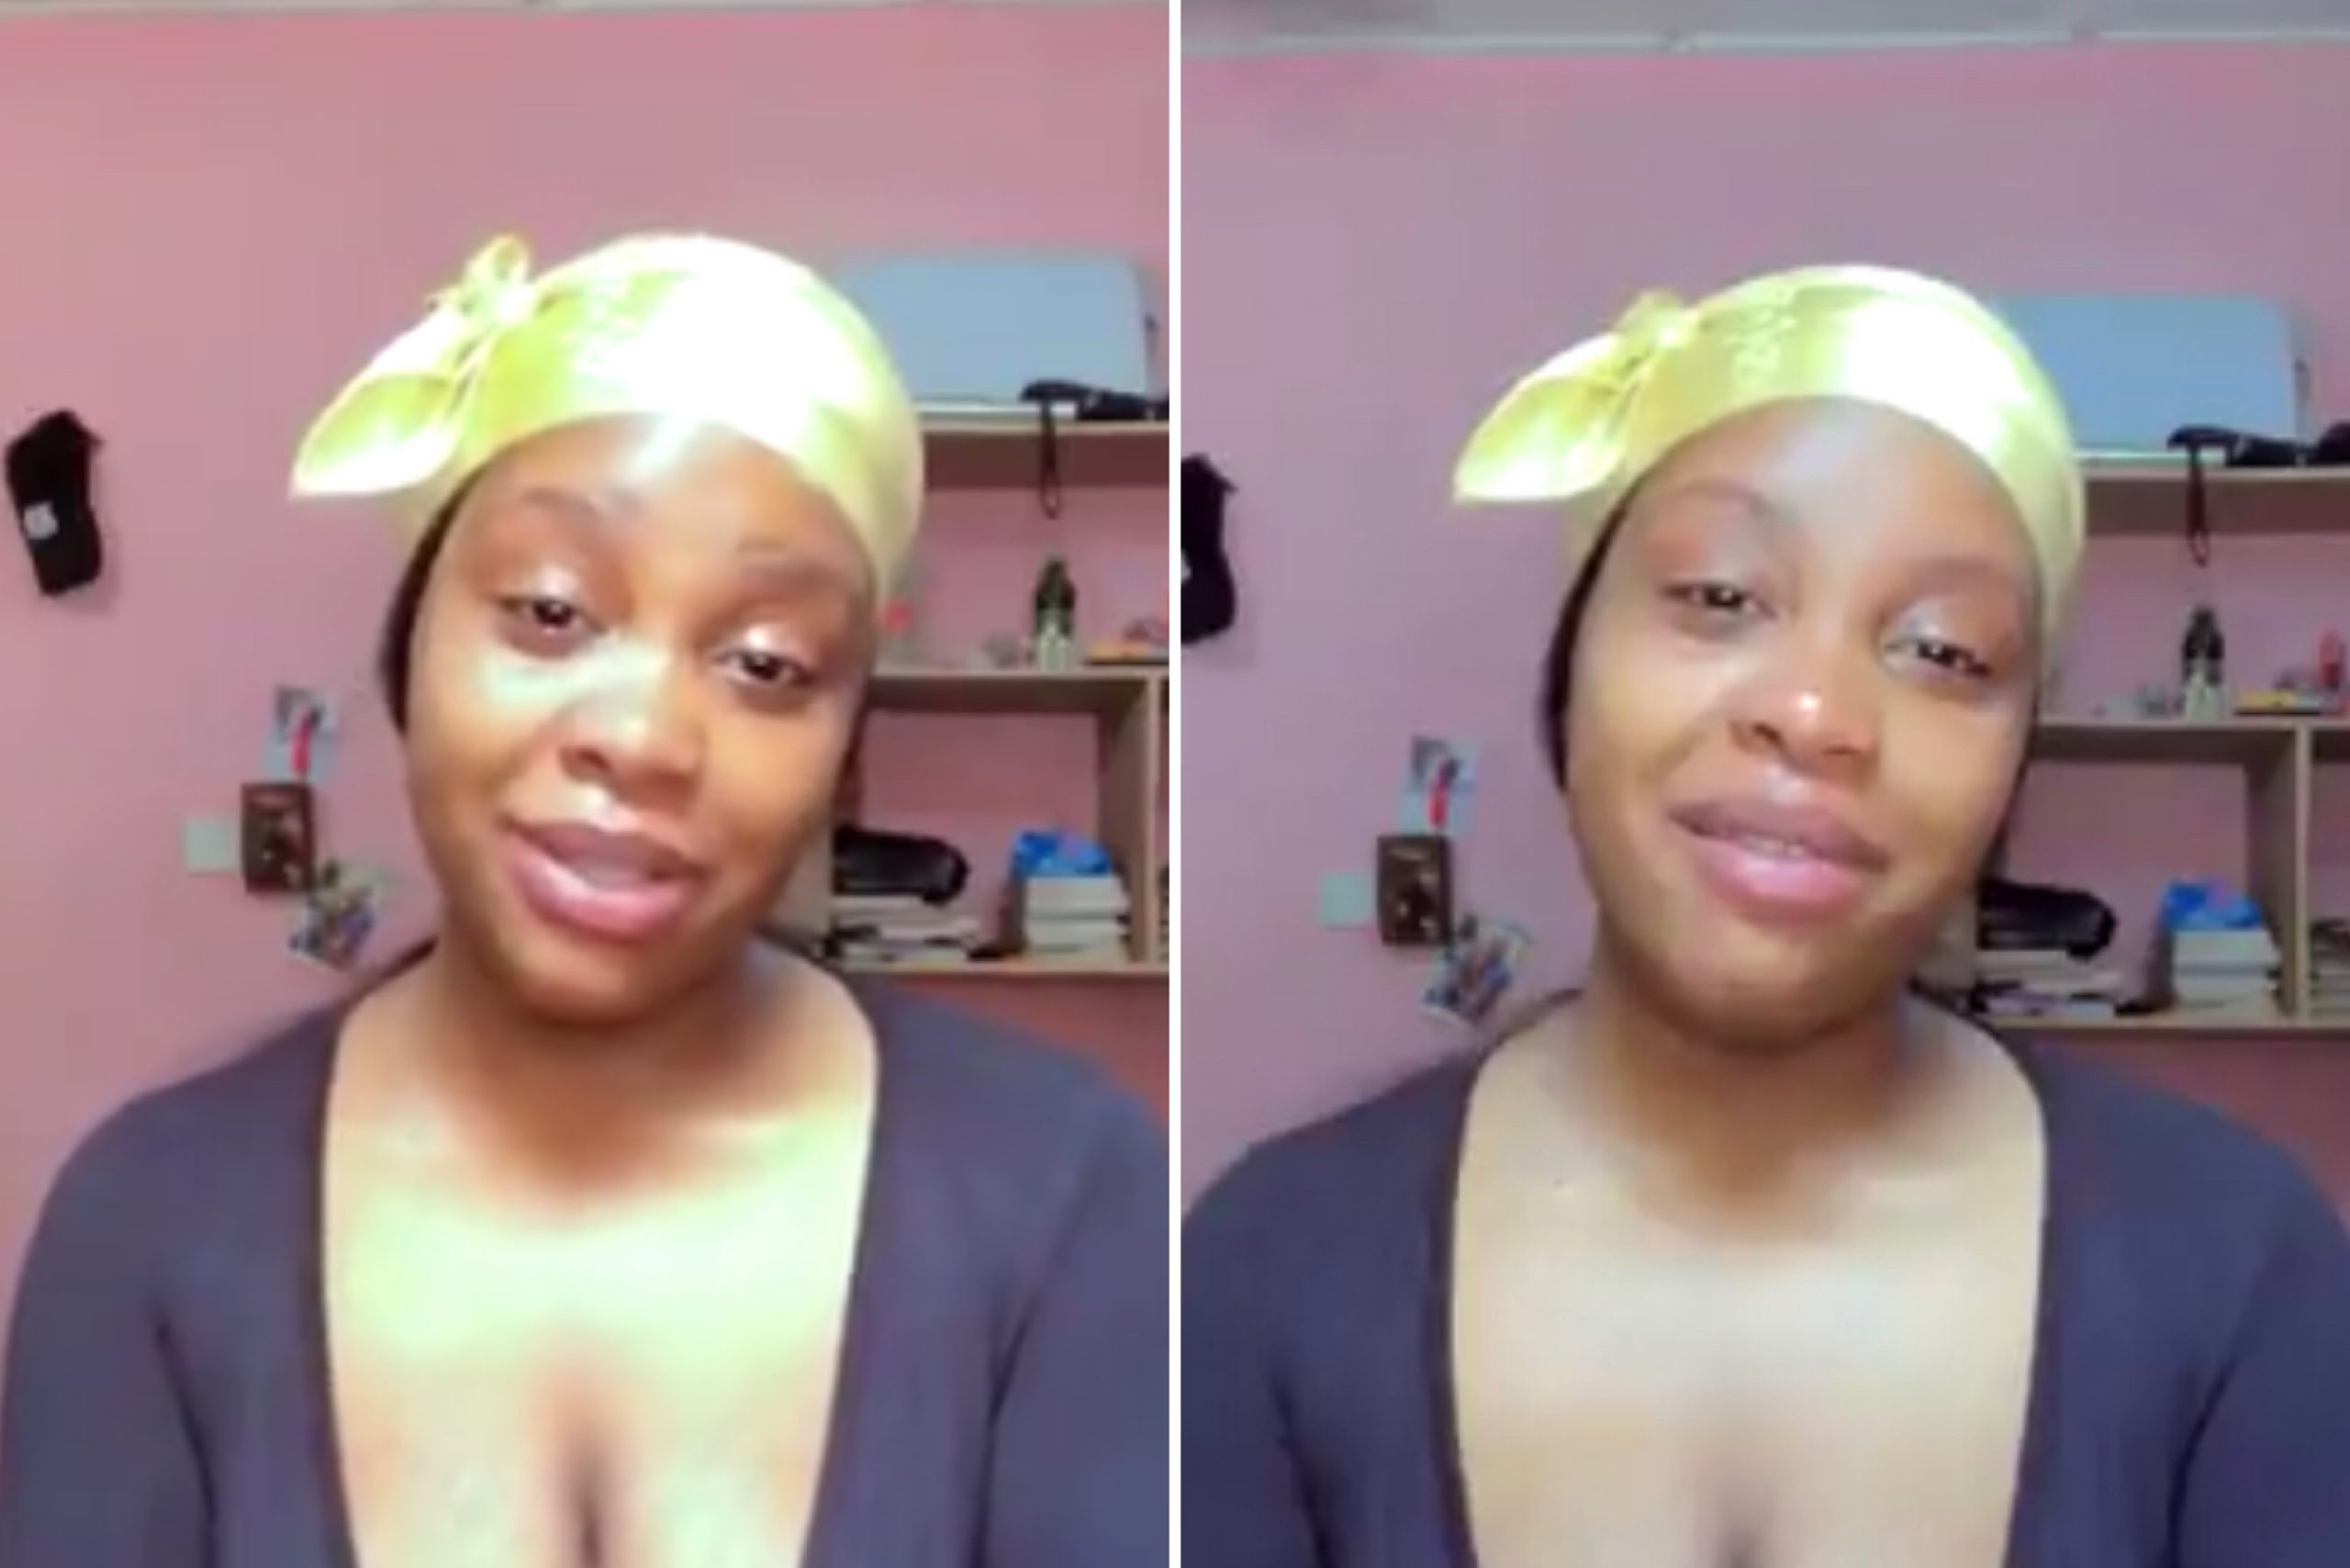 ‘I've Been Depressed Many Times’ - Lady Cries Out Over Being Body-Shamed For Having Saggy Breasts